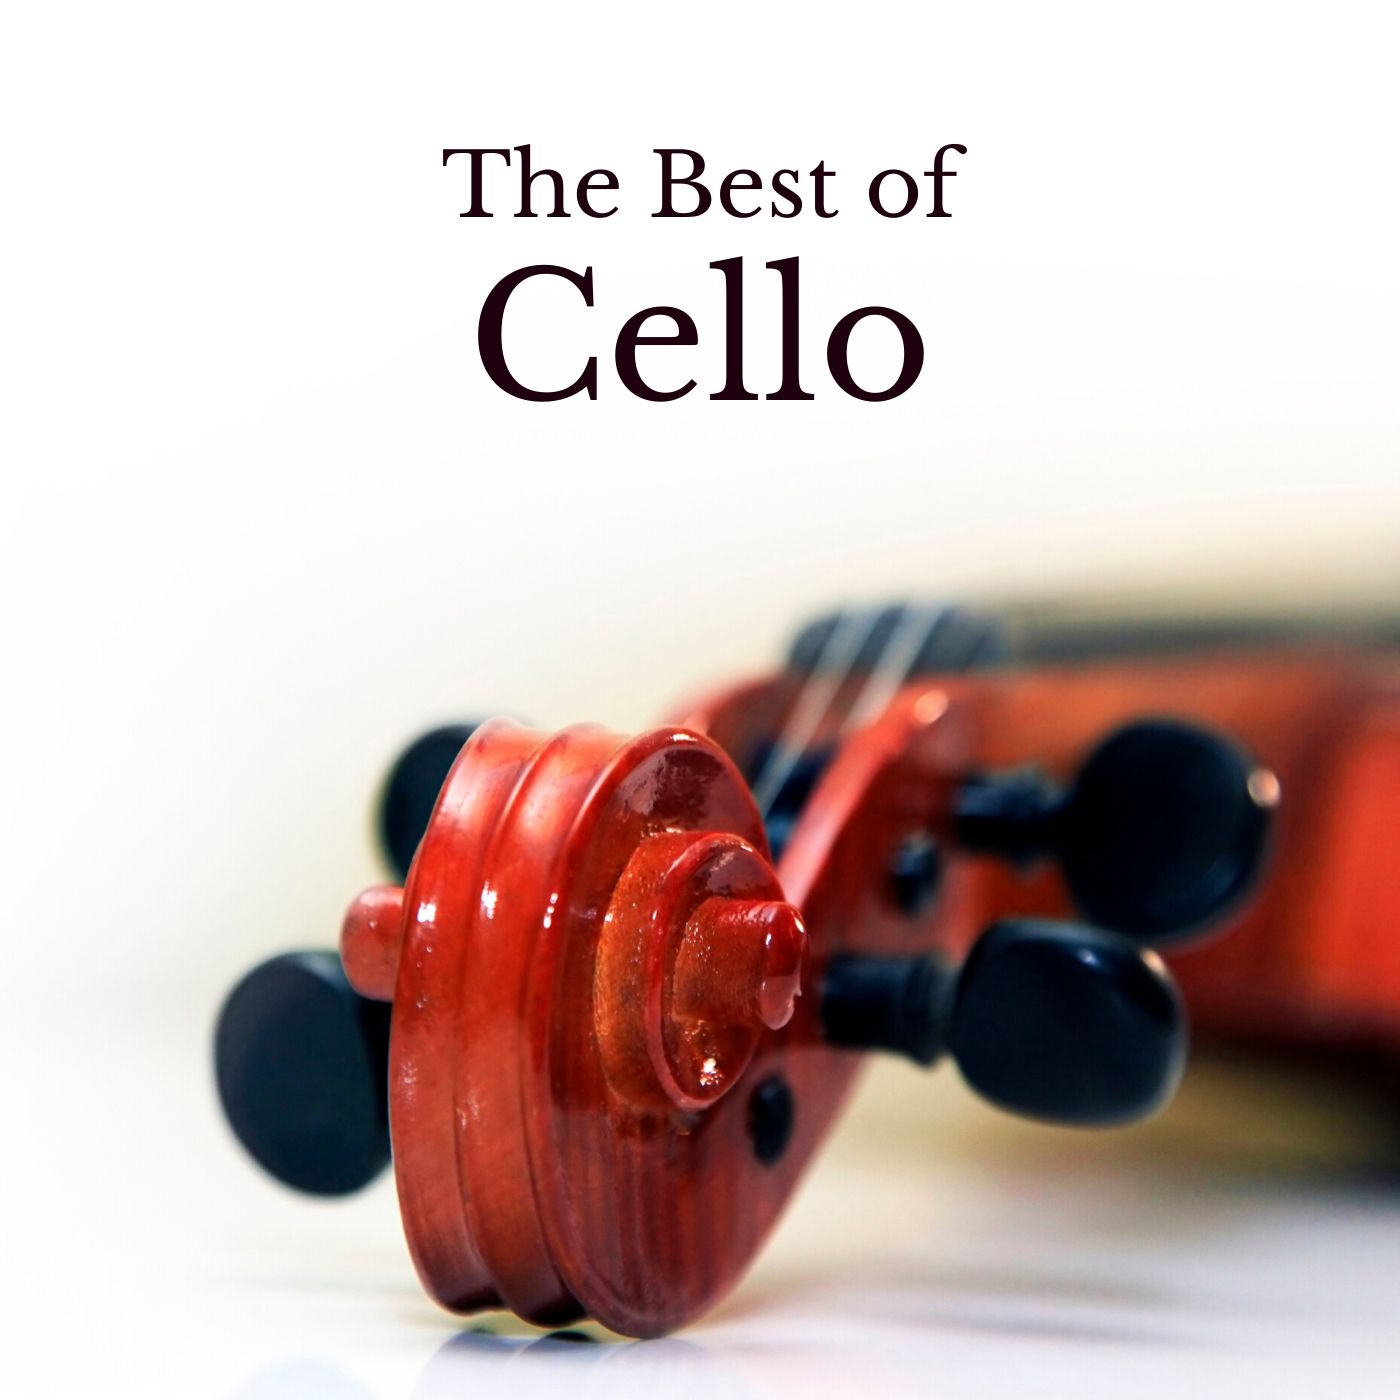 The Best of Cello